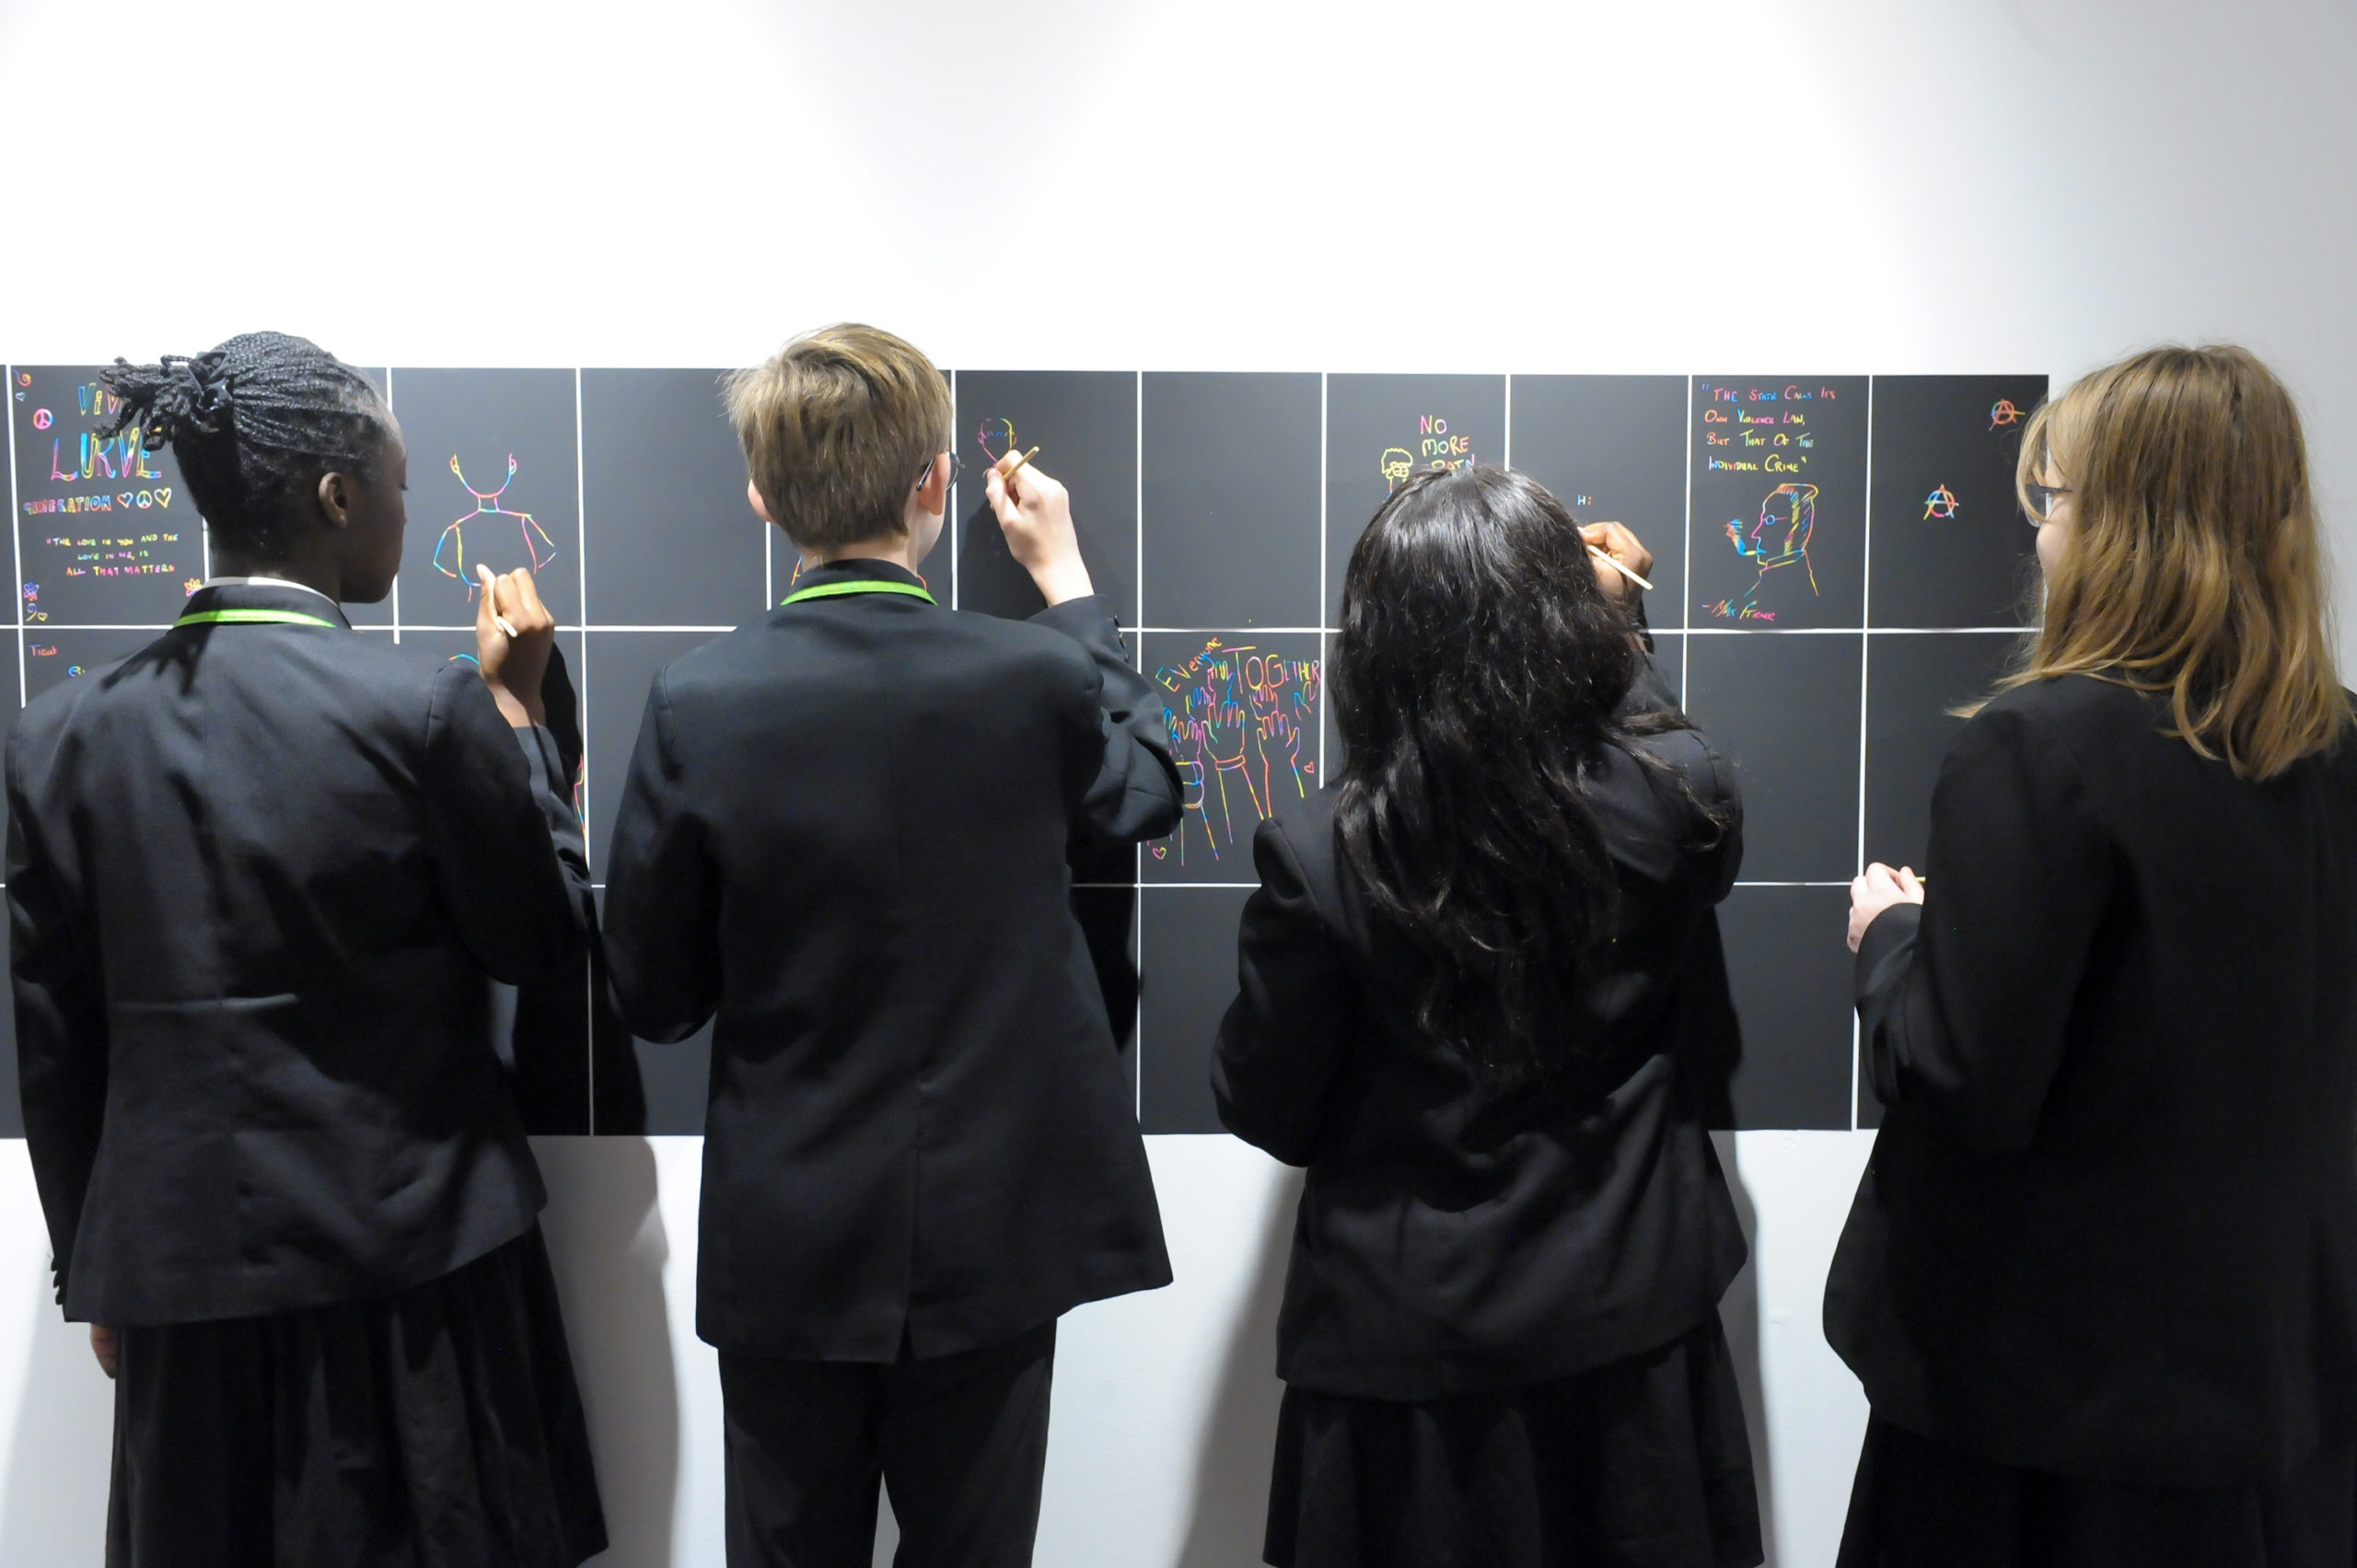 Four young people face the wall and draw on a chalkboard sign with their messages at the National justice museum.